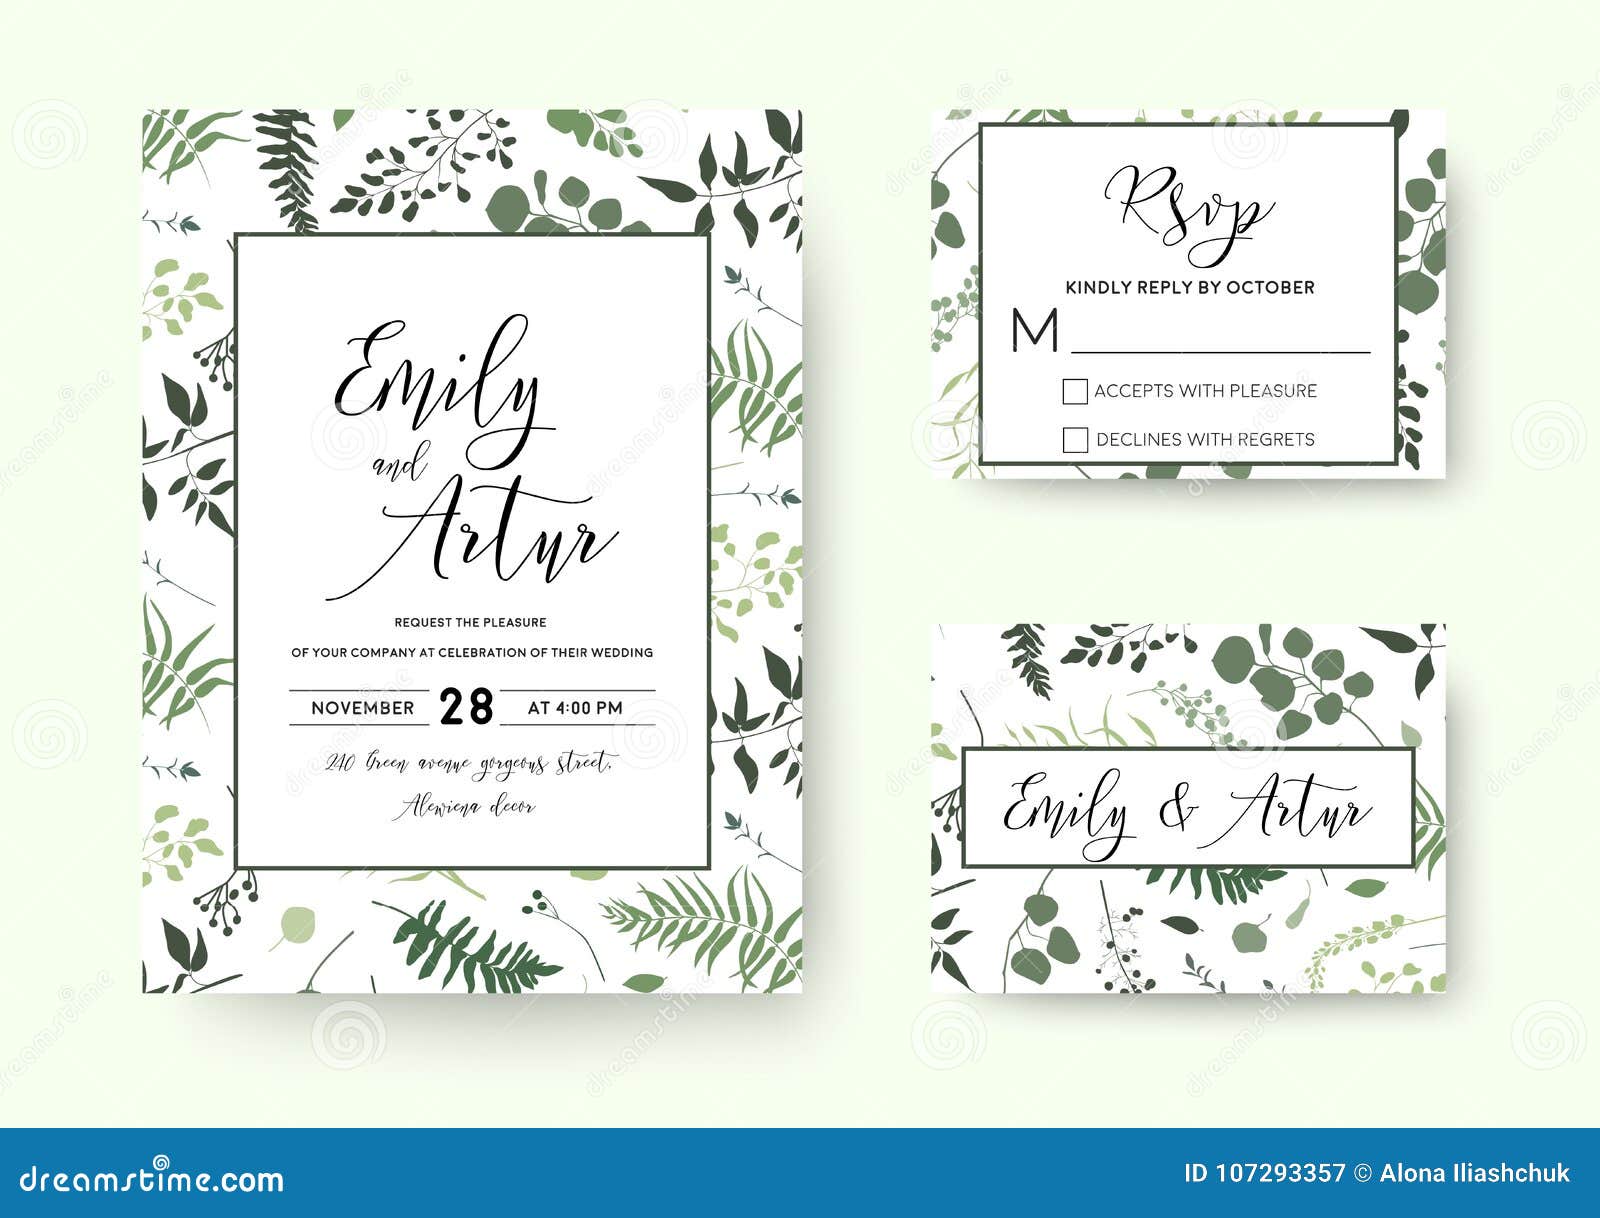 wedding invite, invitation rsvp card  floral greenery silhouette : palm fern tree, foliage natural branches, green le